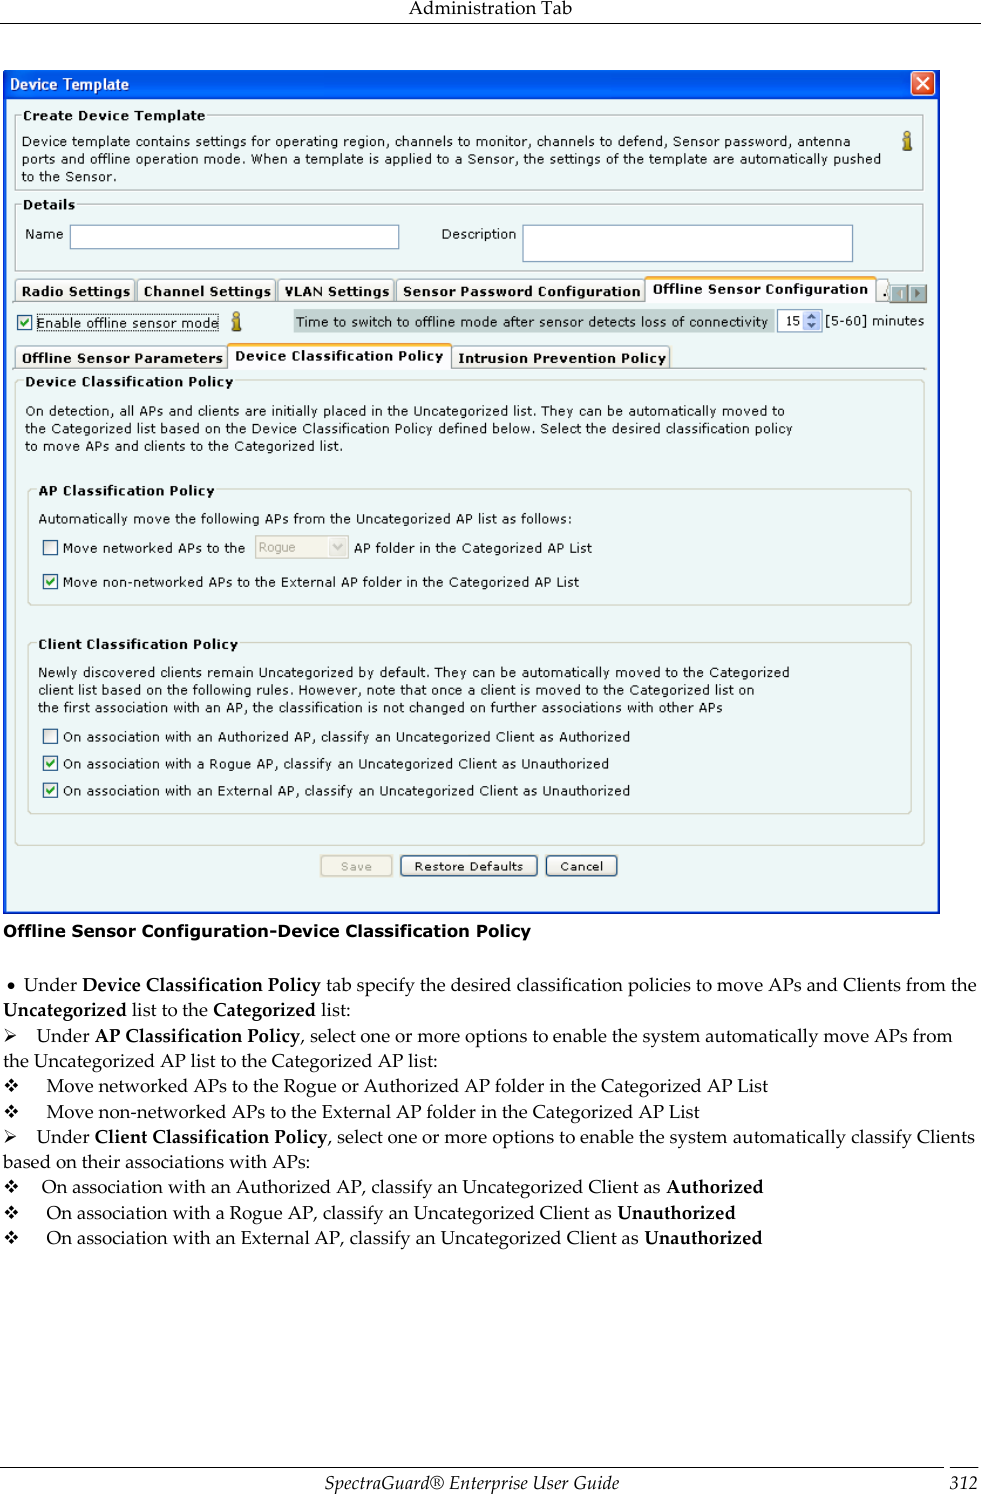 Administration Tab SpectraGuard®  Enterprise User Guide 312  Offline Sensor Configuration-Device Classification Policy      Under Device Classification Policy tab specify the desired classification policies to move APs and Clients from the Uncategorized list to the Categorized list:      Under AP Classification Policy, select one or more options to enable the system automatically move APs from the Uncategorized AP list to the Categorized AP list:        Move networked APs to the Rogue or Authorized AP folder in the Categorized AP List        Move non-networked APs to the External AP folder in the Categorized AP List      Under Client Classification Policy, select one or more options to enable the system automatically classify Clients based on their associations with APs:       On association with an Authorized AP, classify an Uncategorized Client as Authorized        On association with a Rogue AP, classify an Uncategorized Client as Unauthorized        On association with an External AP, classify an Uncategorized Client as Unauthorized 